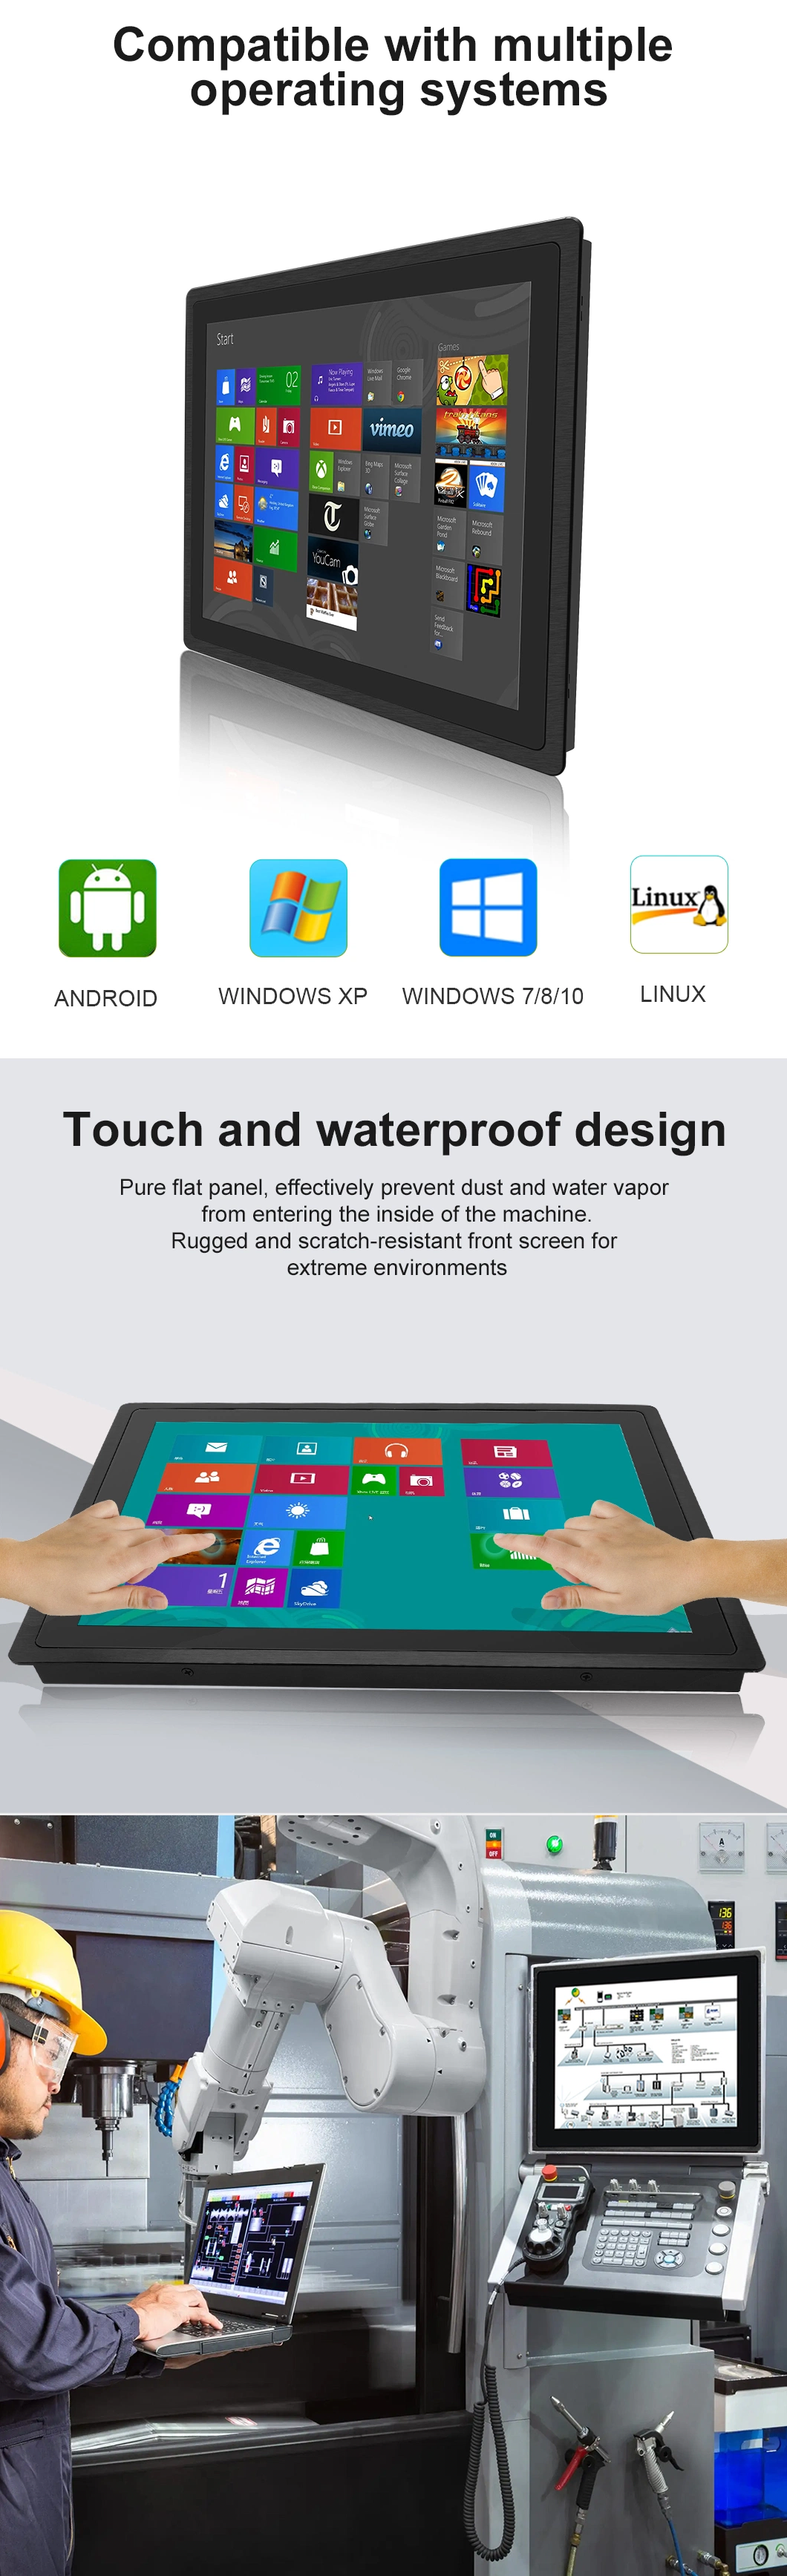 Waterproof Embedded 15 Inch X86 Generation2 I7 All in One Panel PC Capacitive Touchscreen with Fanless Industrial Computer